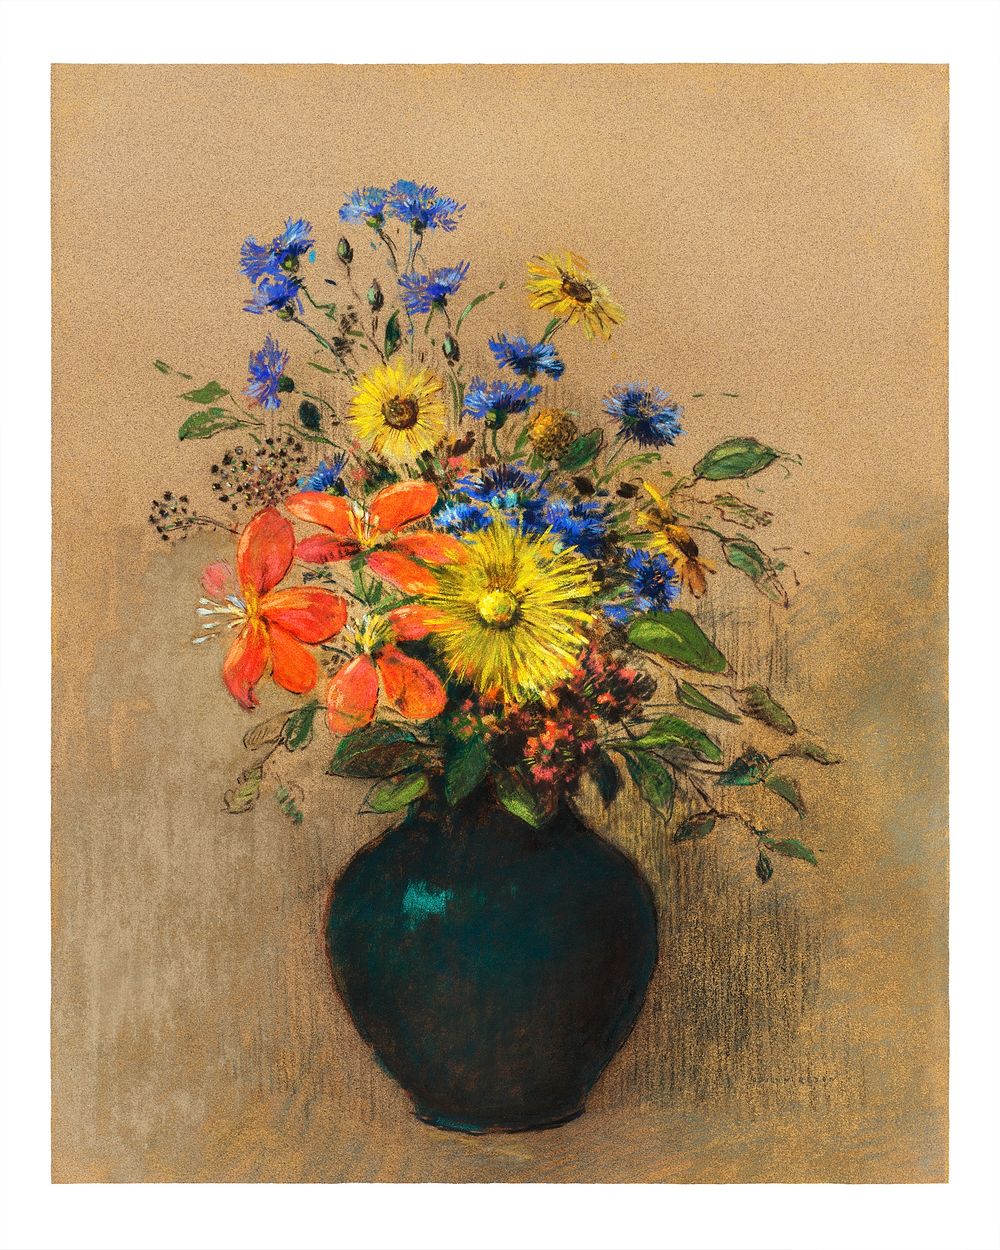 Wildflowers (1905) by Odilon Redon. Original from the National Gallery of Art. Digitally enhanced by rawpixel.